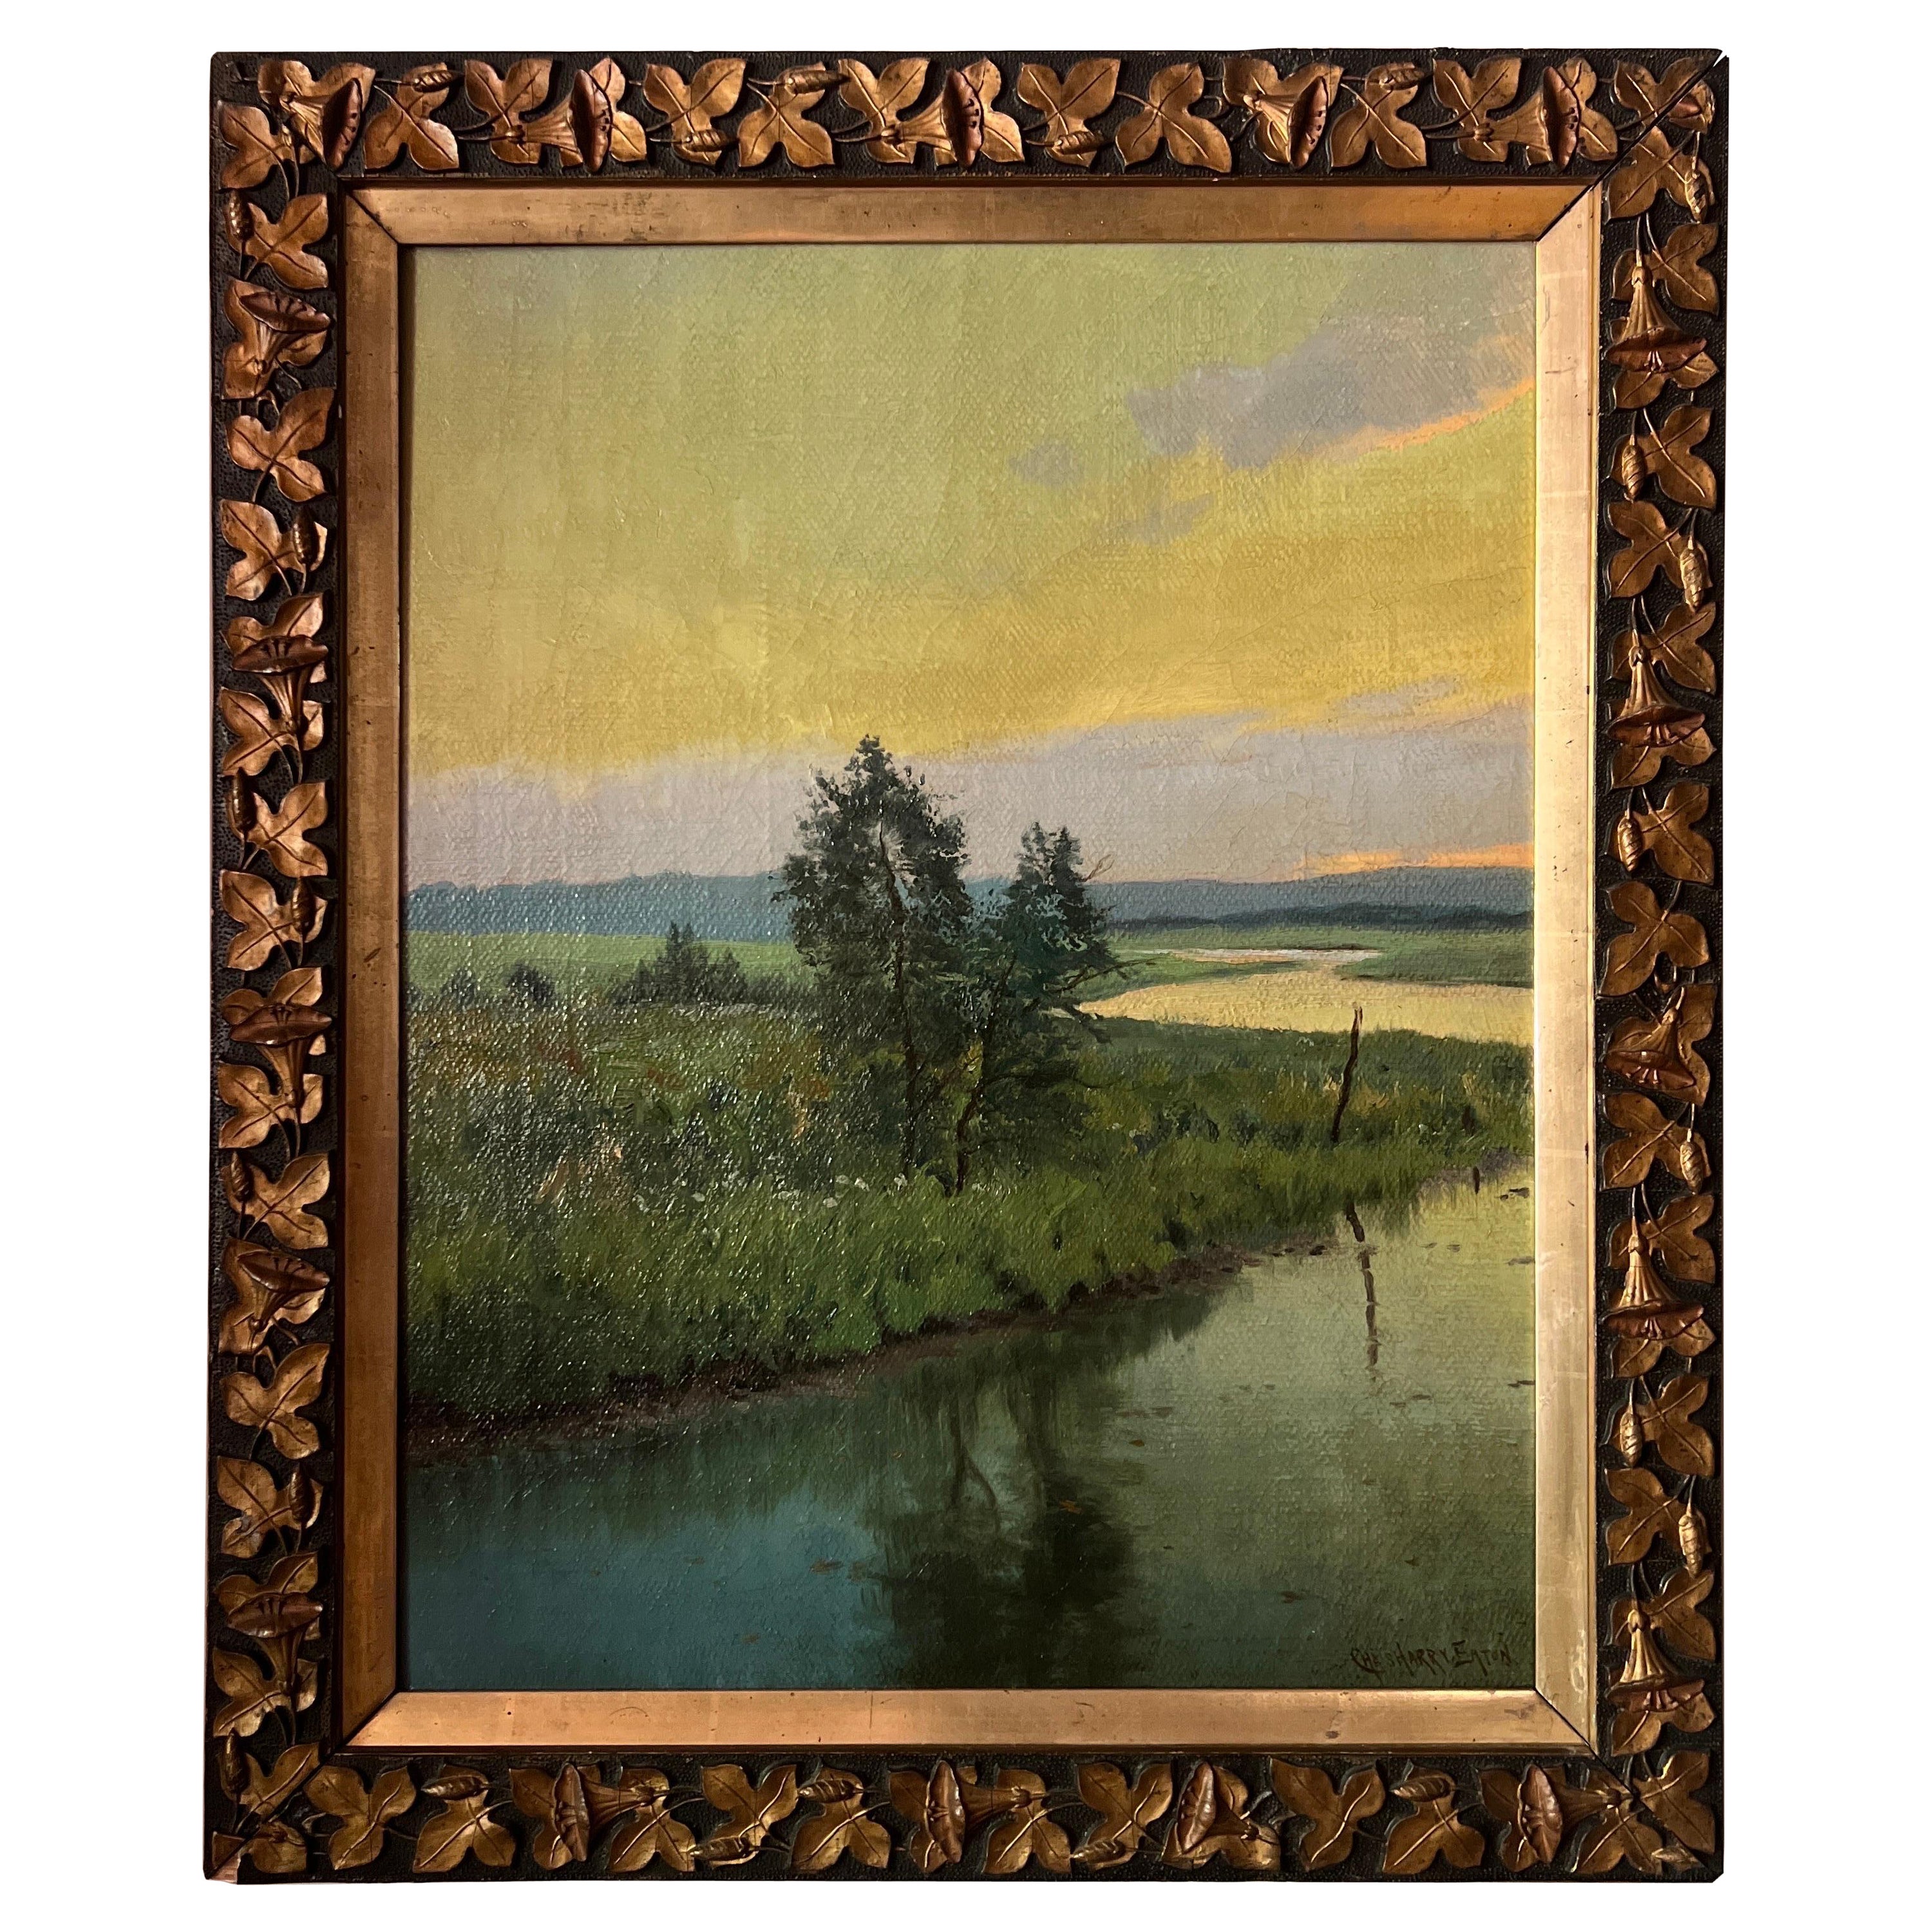 Charles Harry Eaton (American, 1850-1901) "Marsh Landscape" Period Frame O/C For Sale